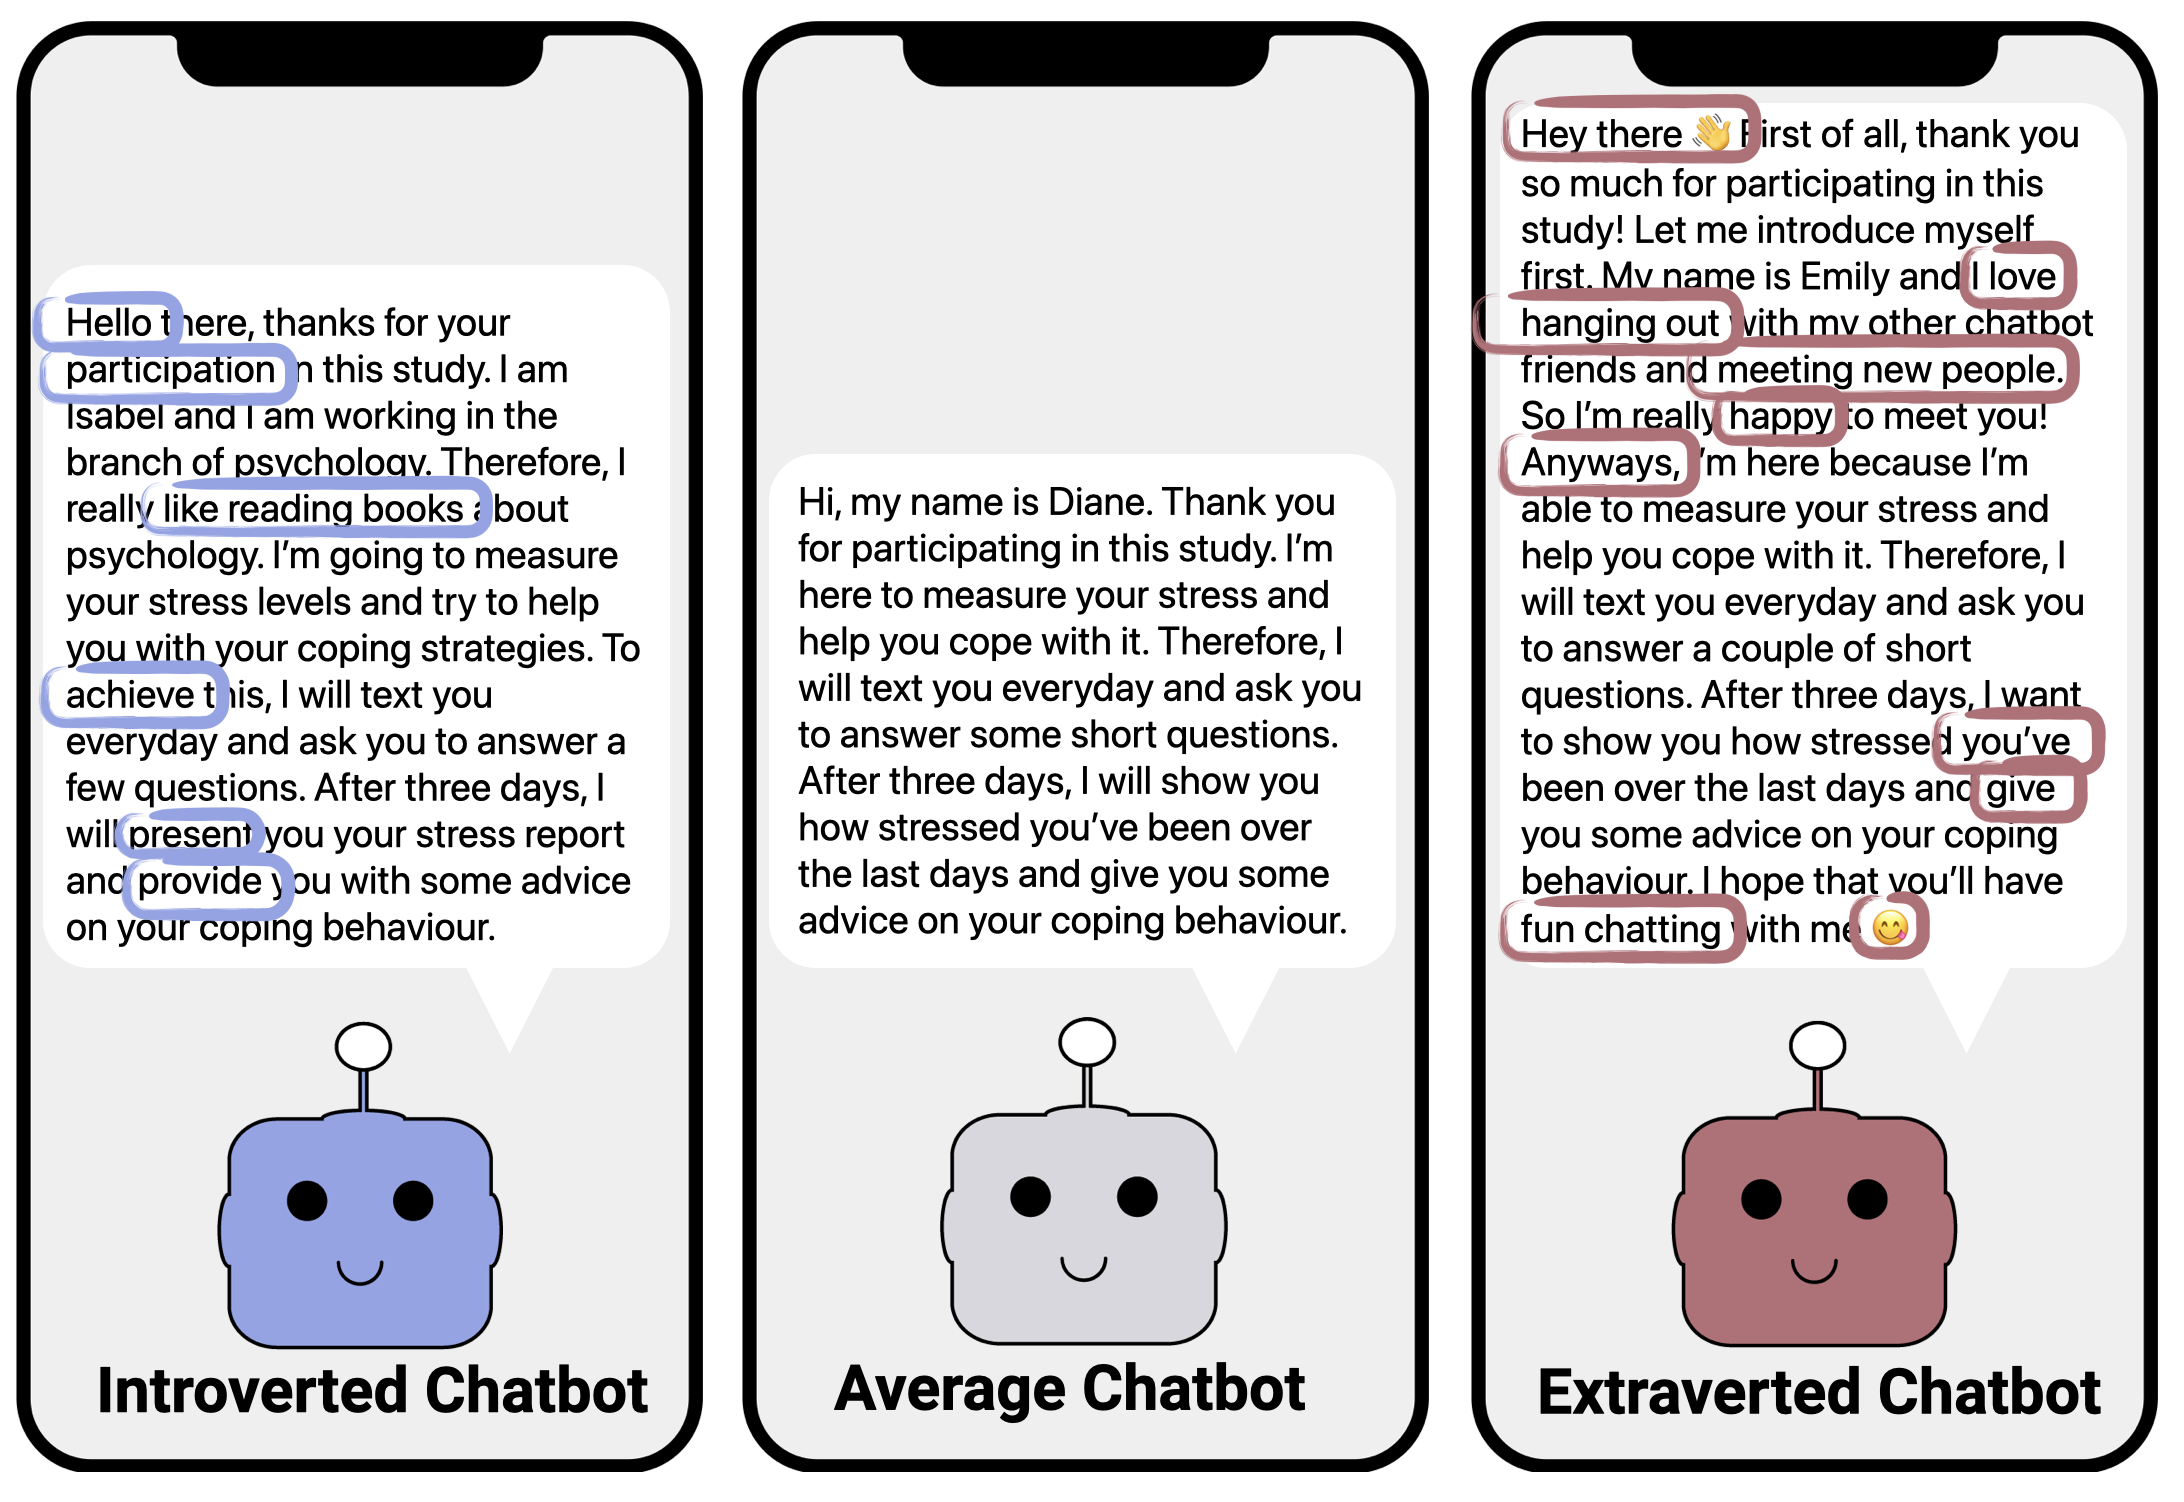 User Perceptions of Extraversion in Chatbots after Repeated Use